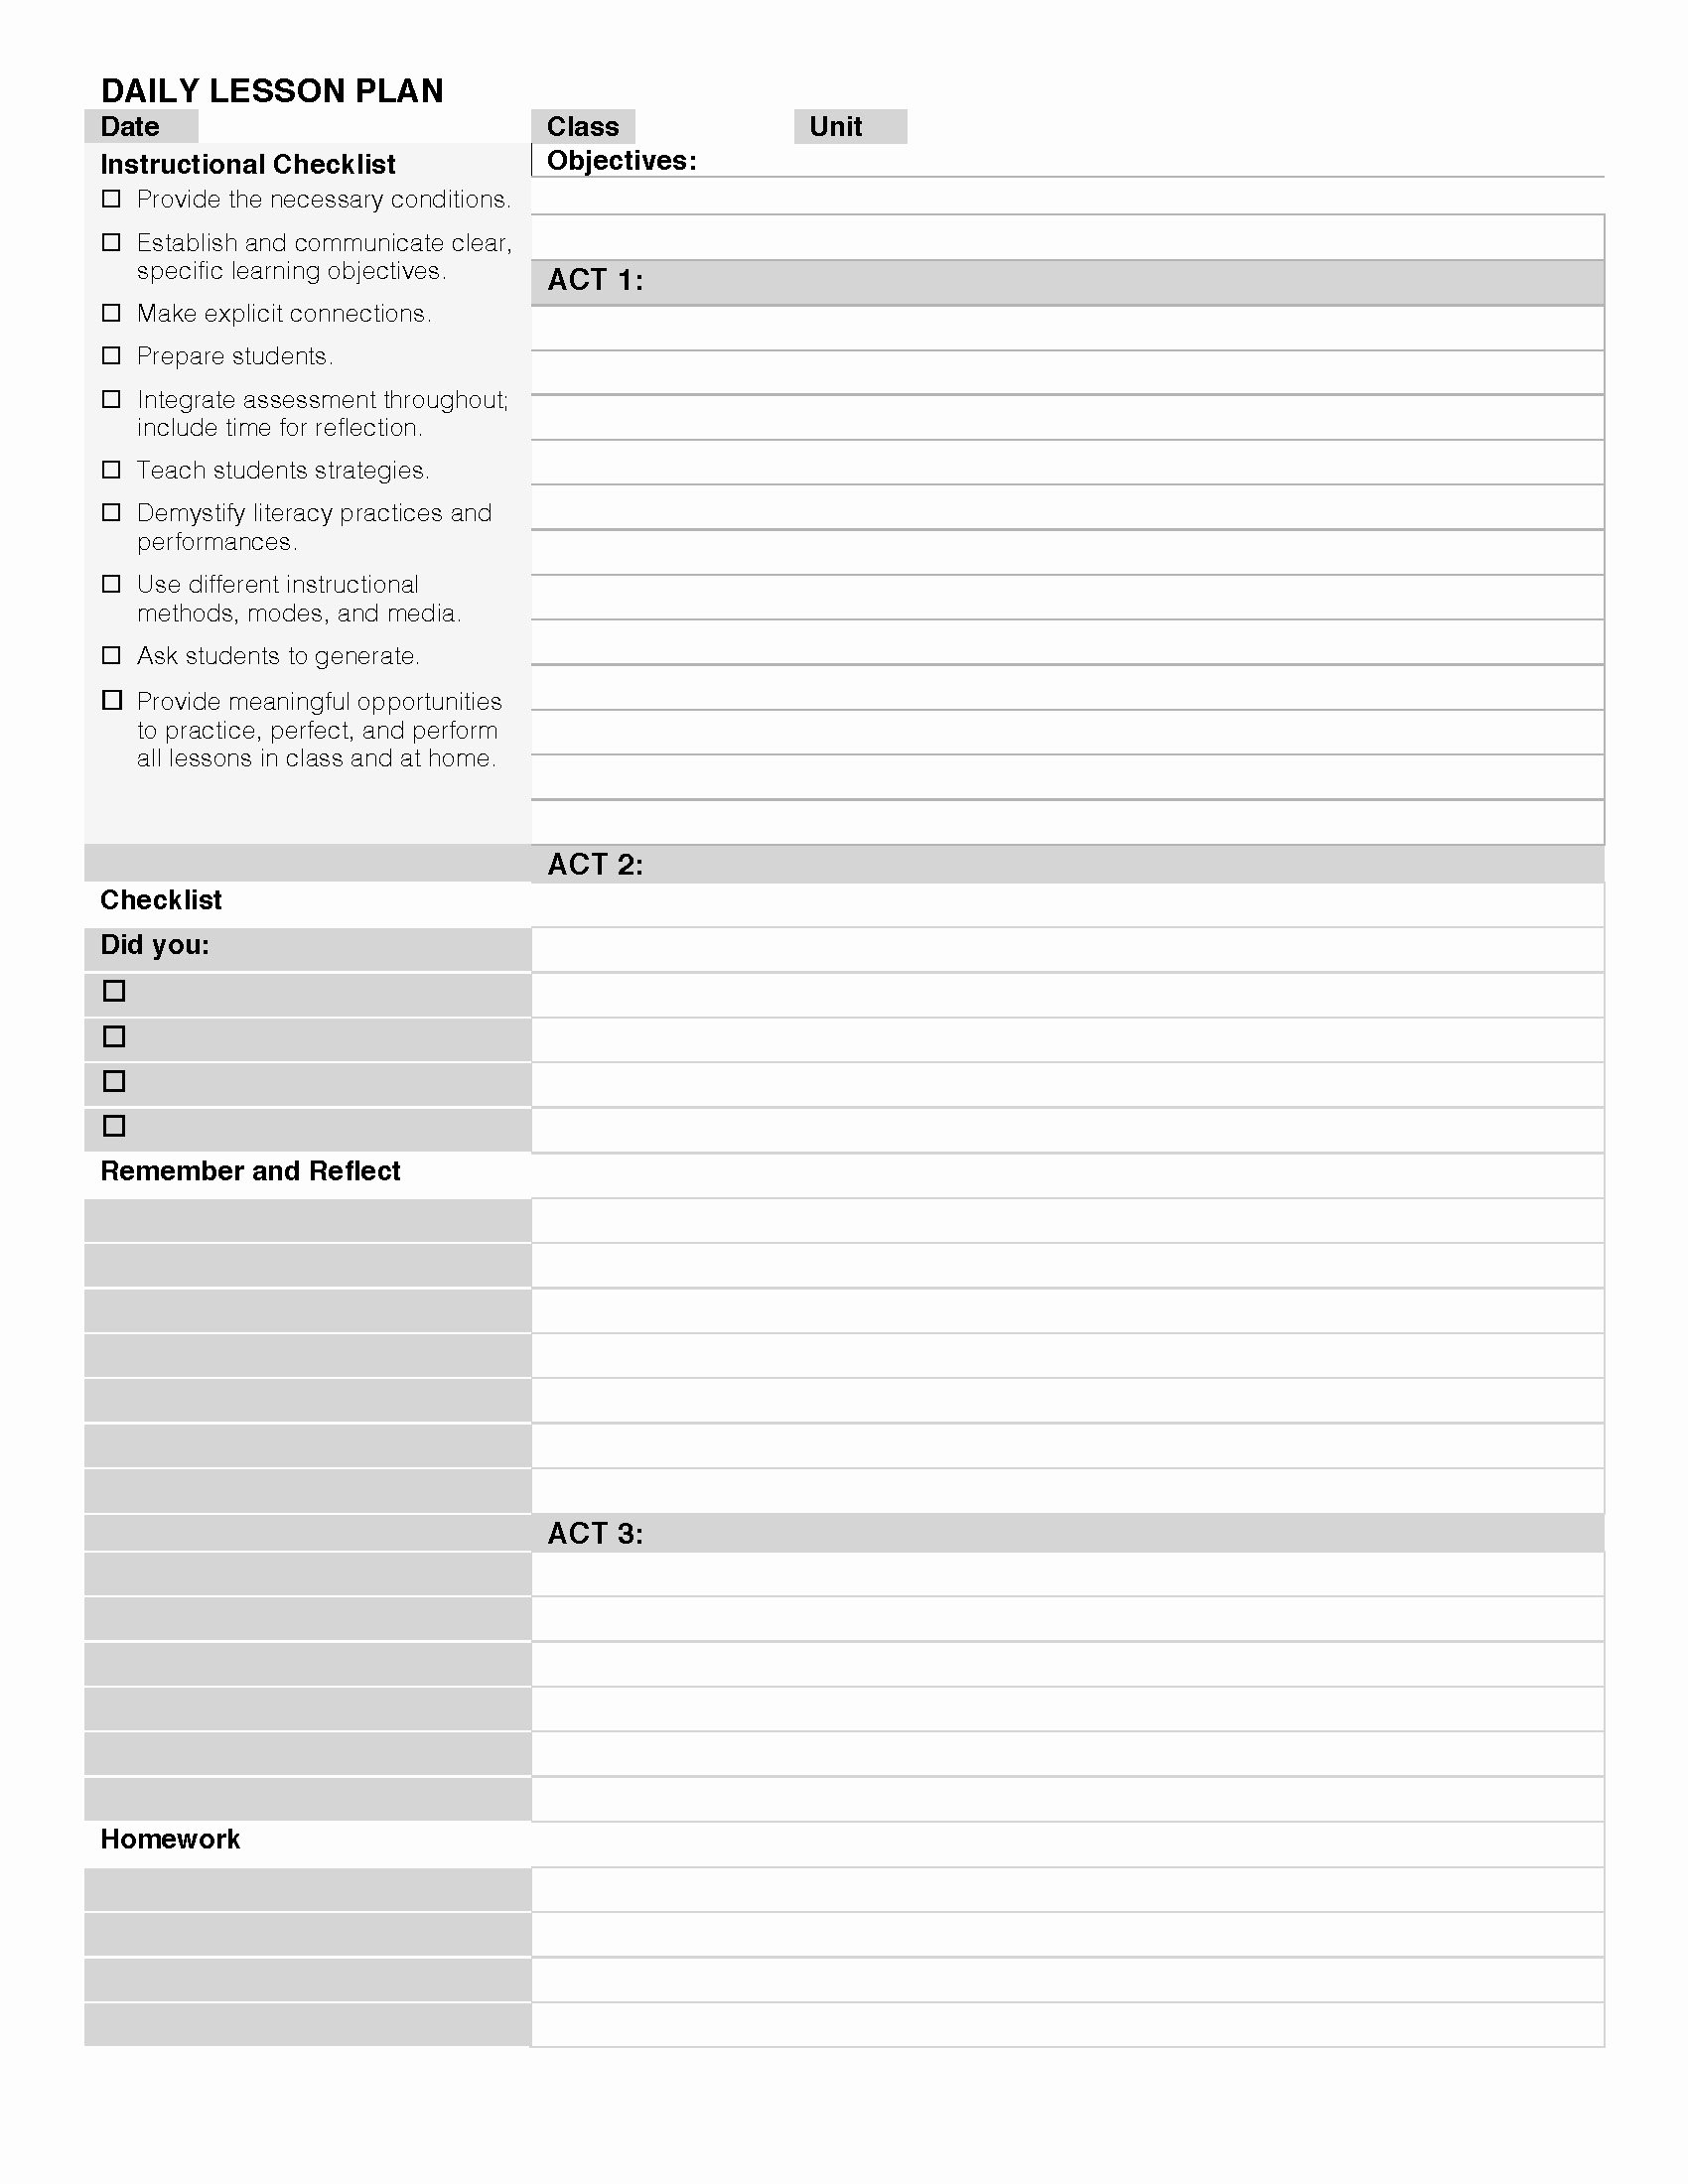 Daily Action Plan Template Beautiful A Guest Post From Jim Burke In Response to My Post On